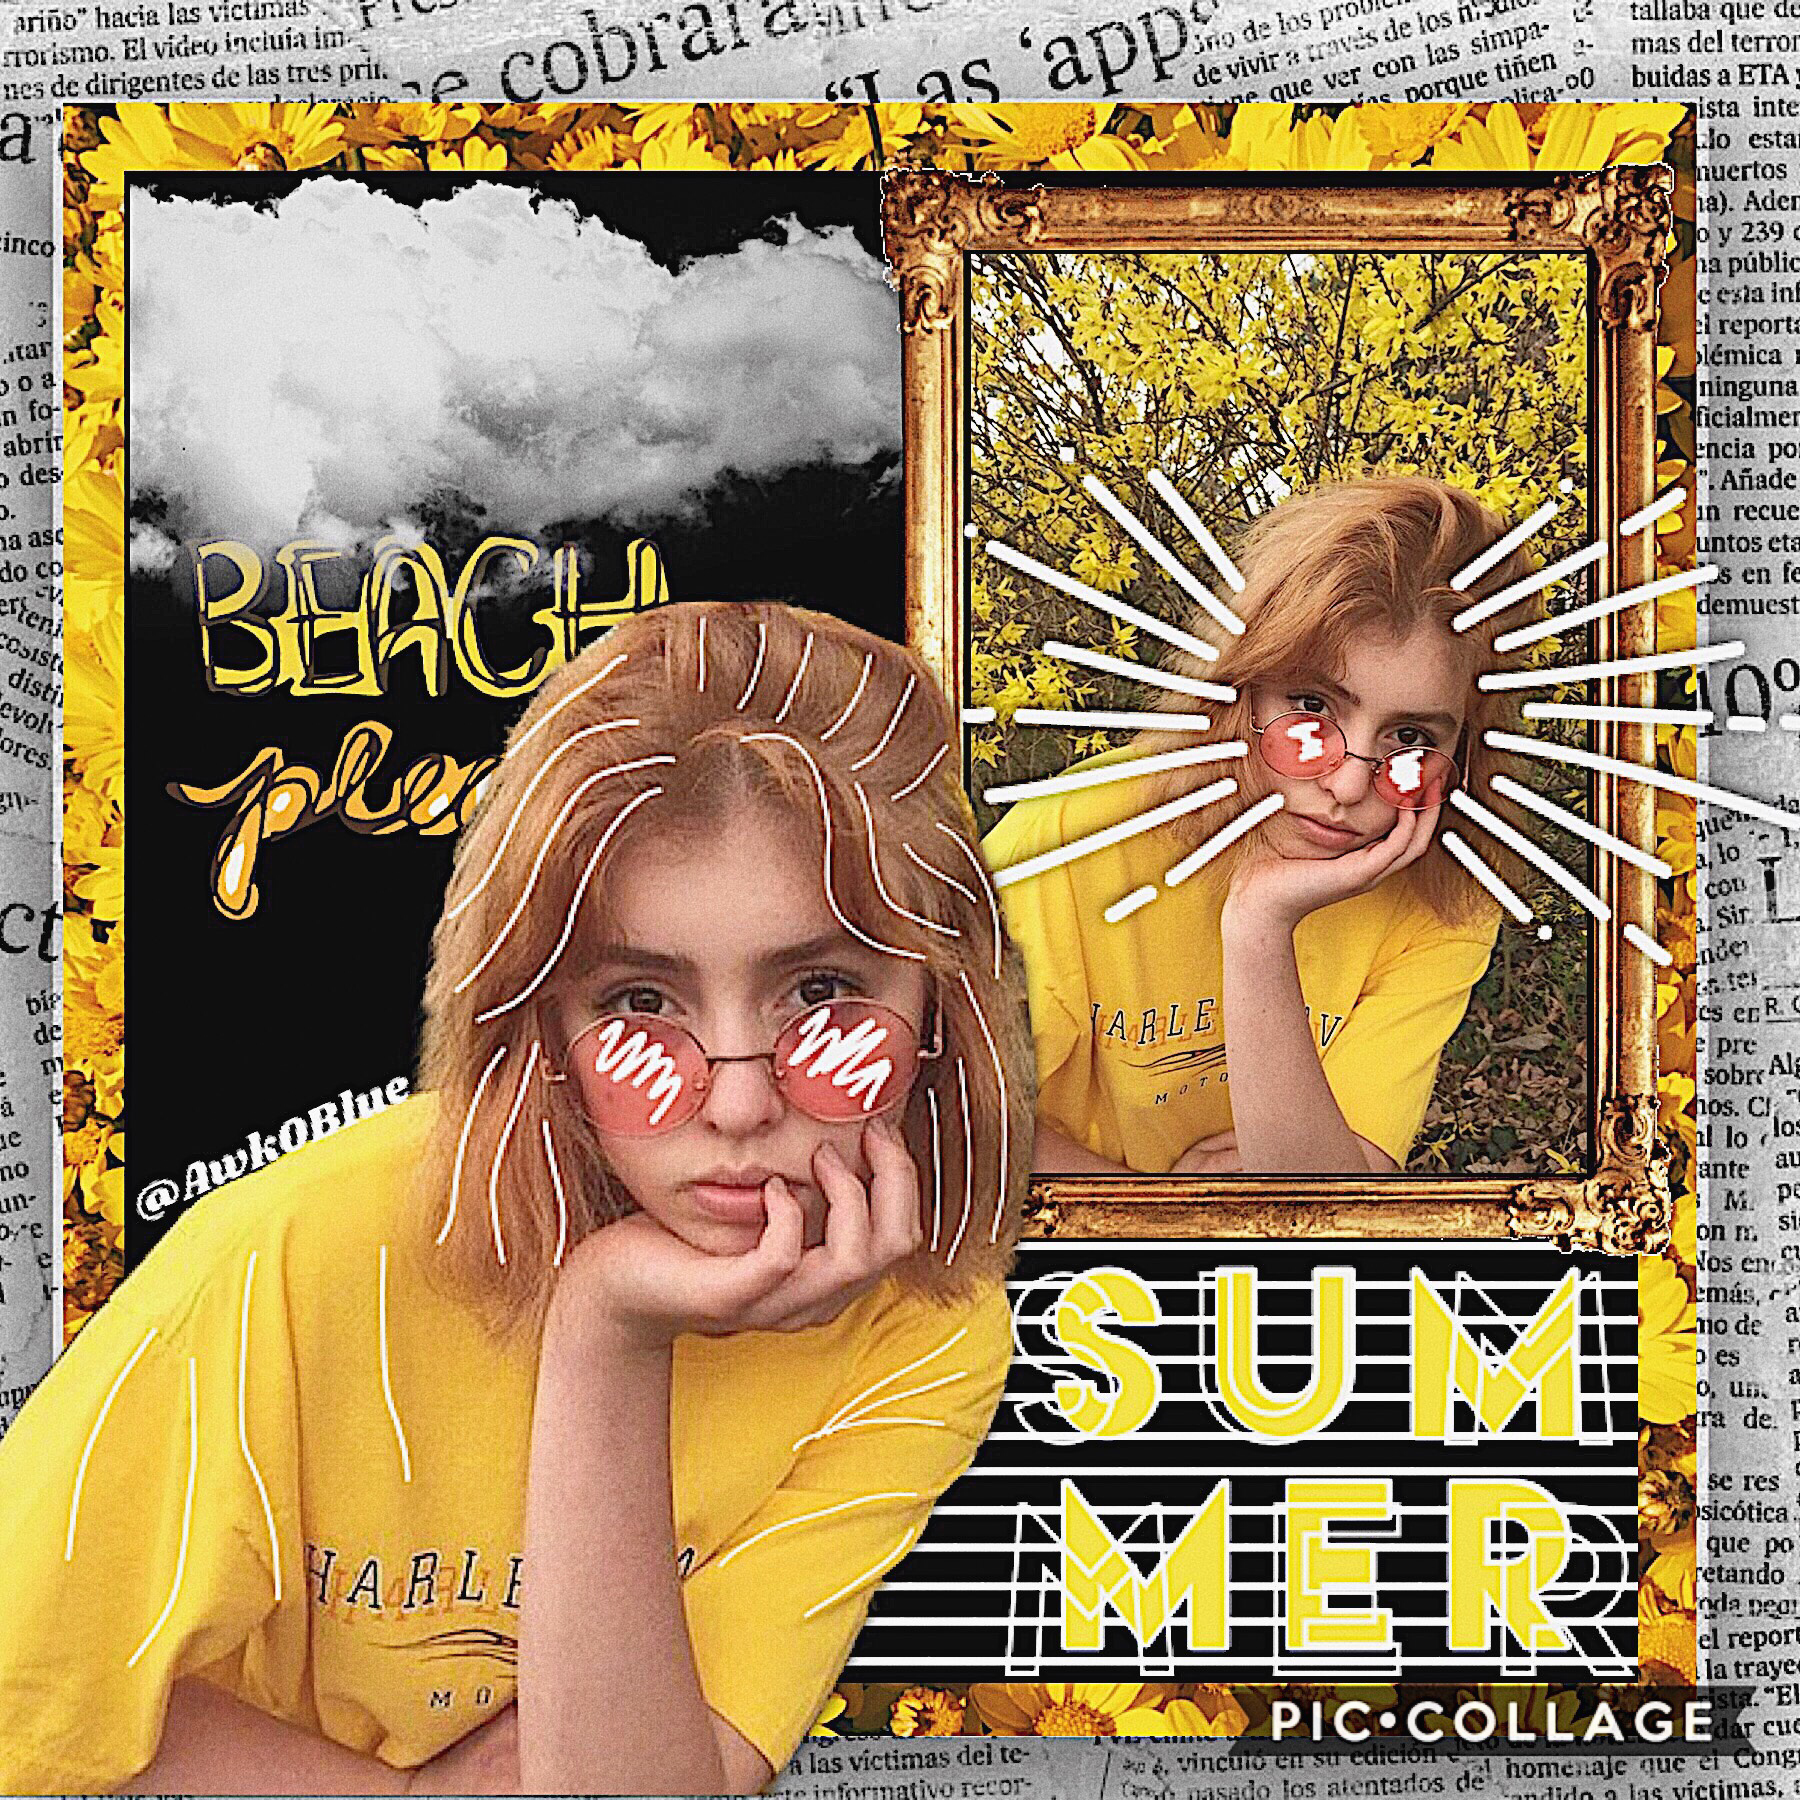 💁‍♀️ t a p 💁‍♀️

It’s the final collage for my yellow themeee! I know I know I did like 12 collages for this theme but I had fun doing them. 

Ill end up posting my contest entries (there’s a lot) so I won’t be doing any collabs for the moment unless you 